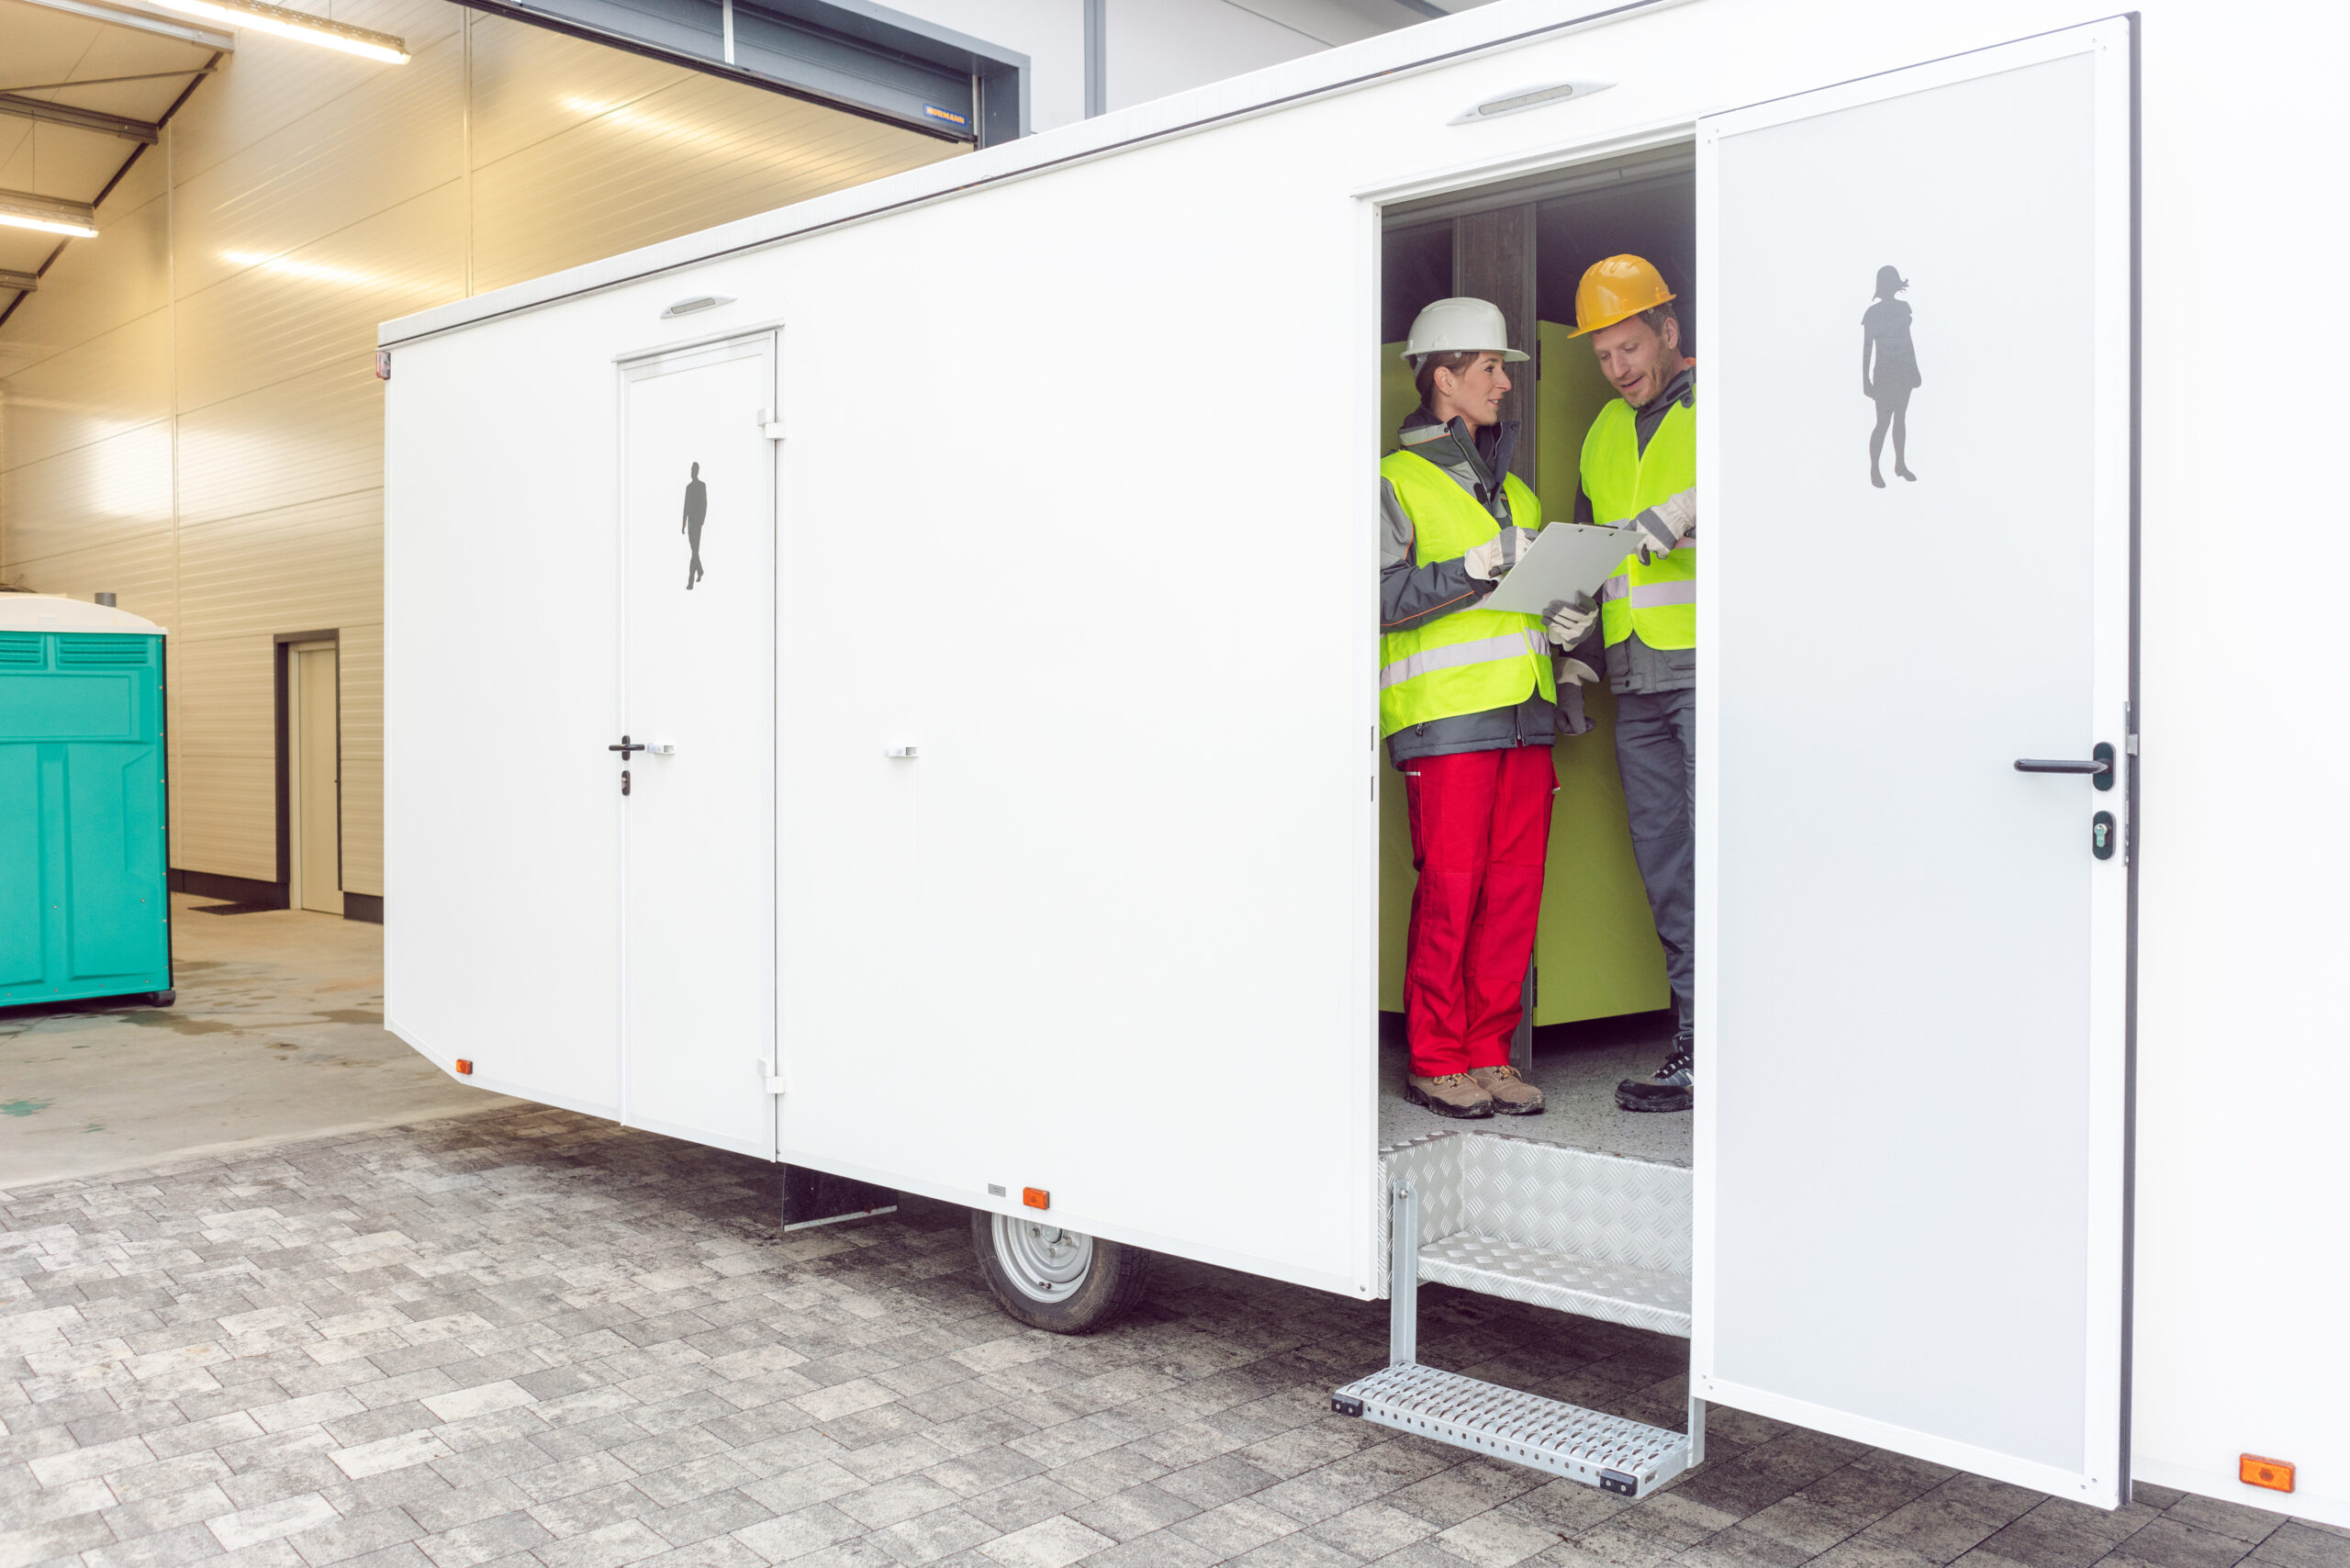 Workers inspecting a restroom trailer before renting it out